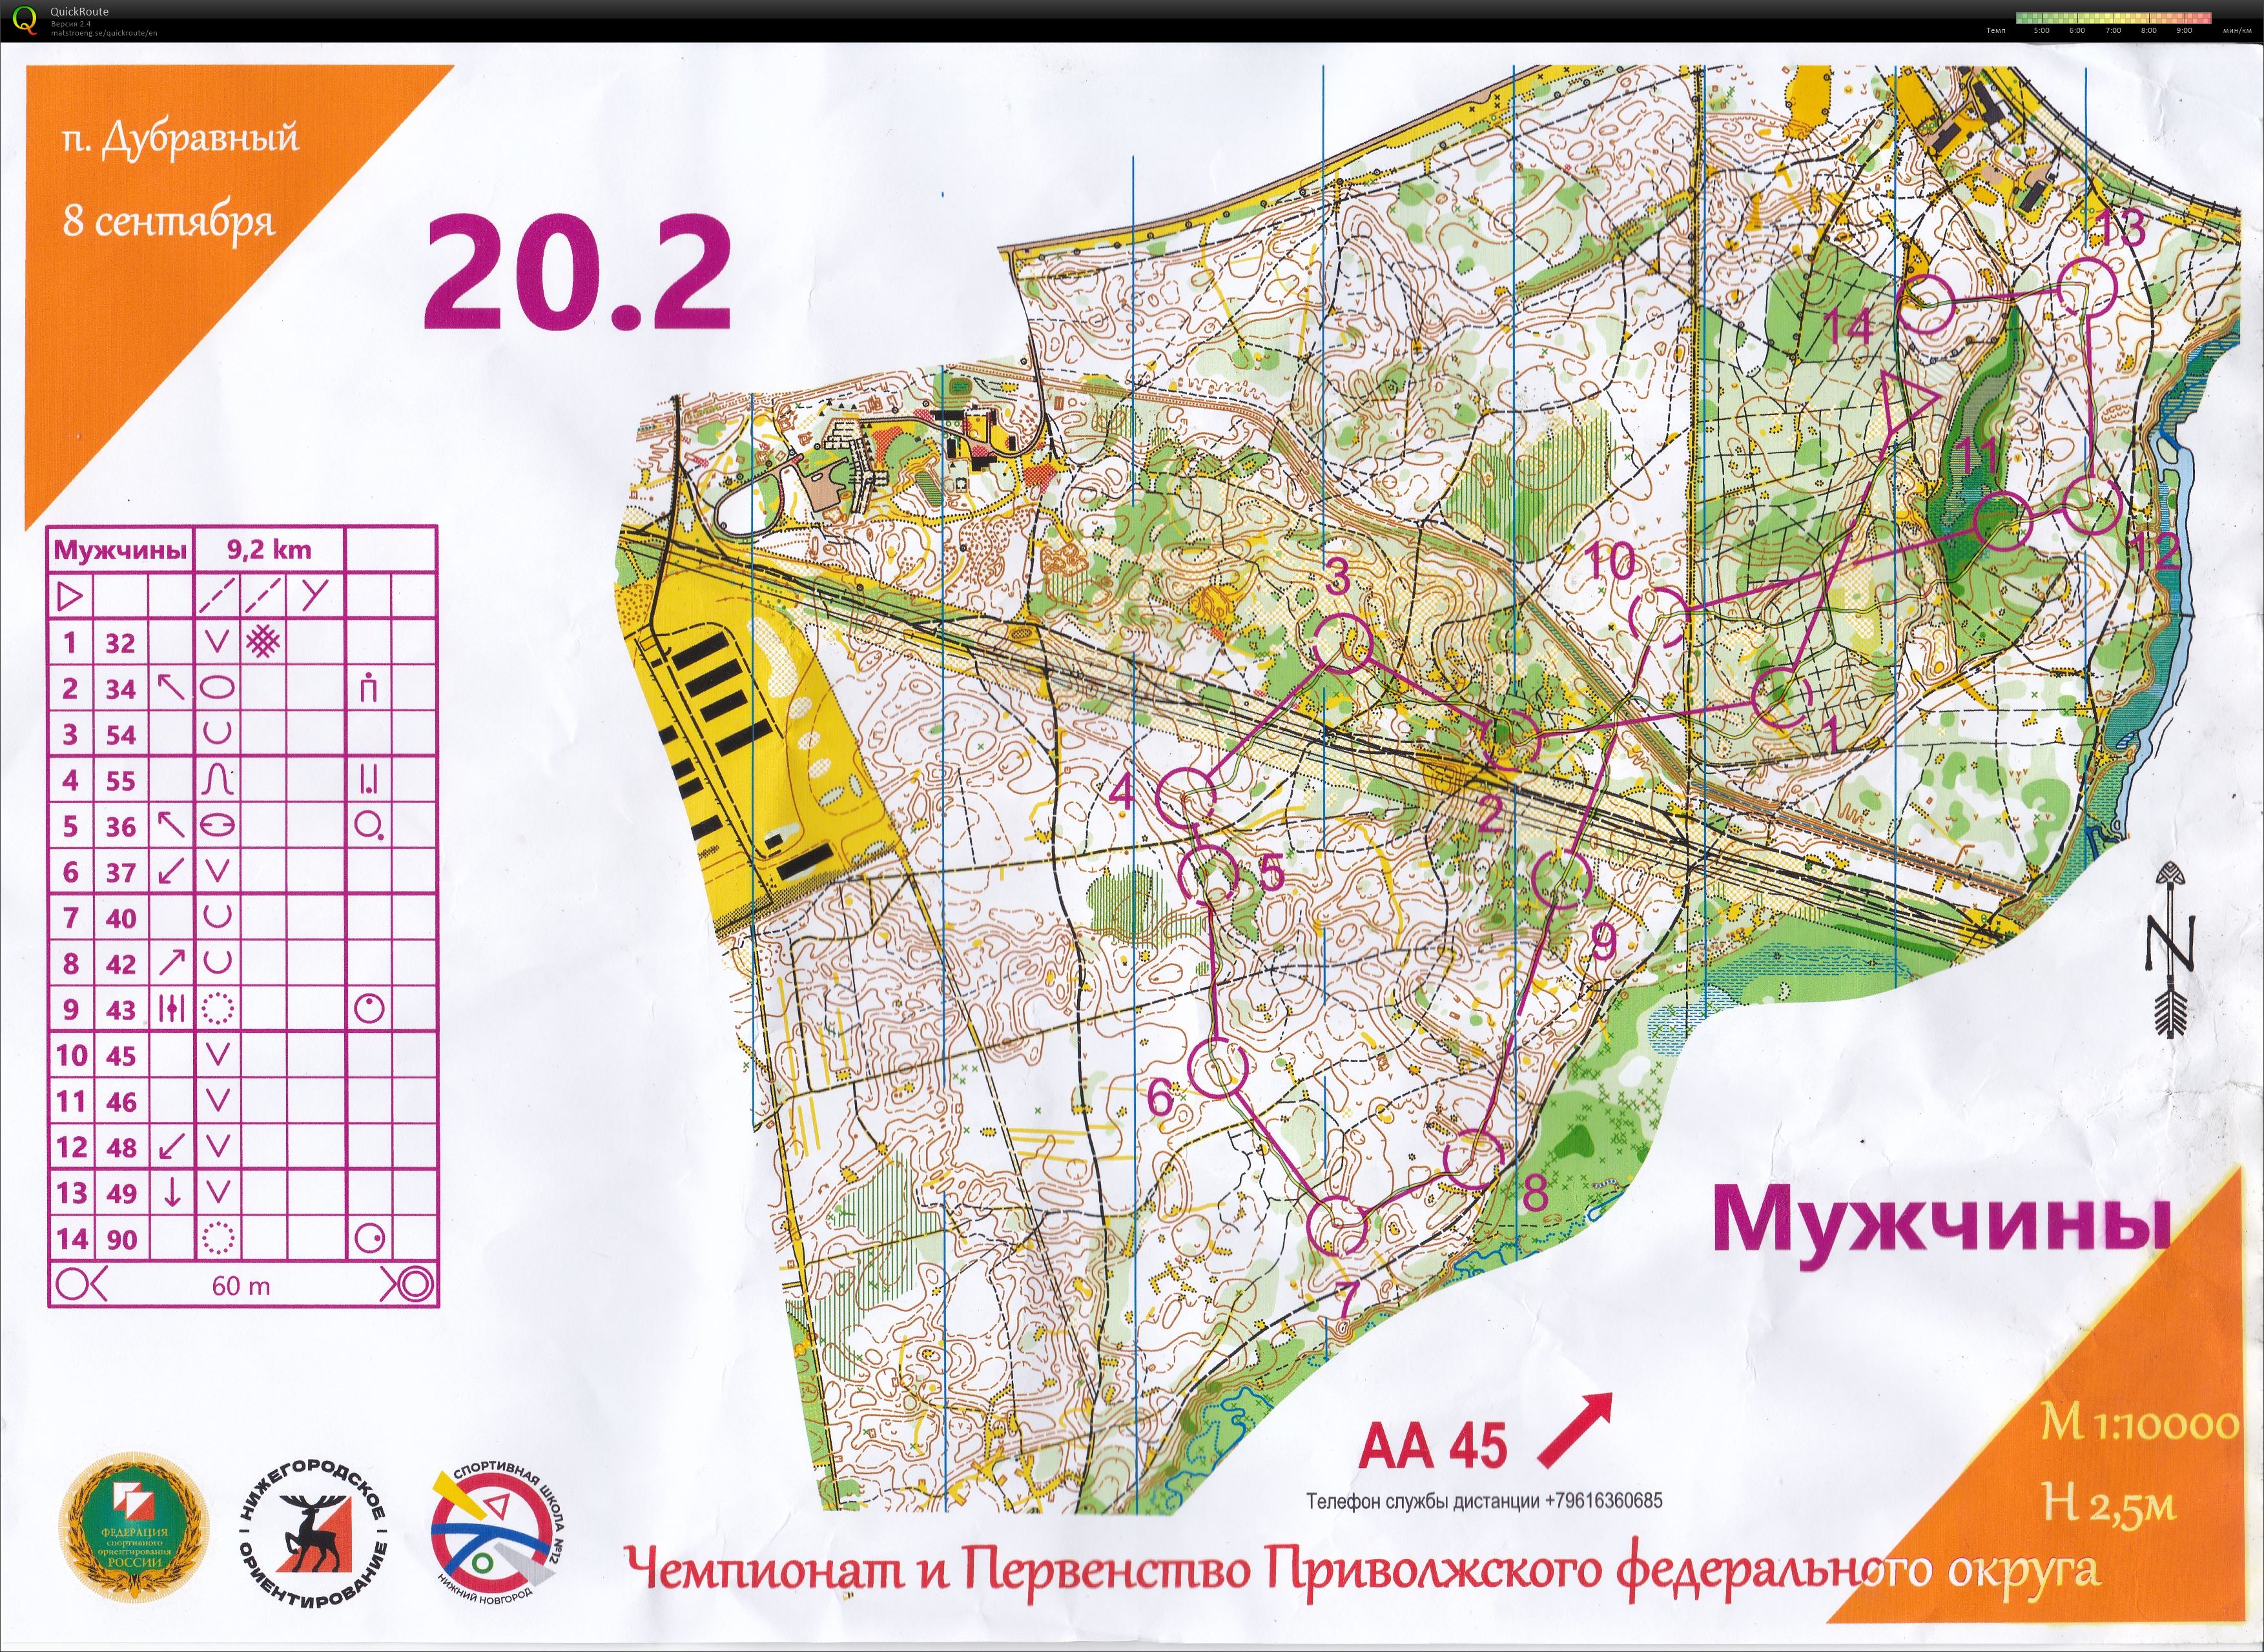 Map with track - Чемпионат ПФО. Лонг. 2й круг, area - Дубравная, from orienteering map archive of Павел Строкин